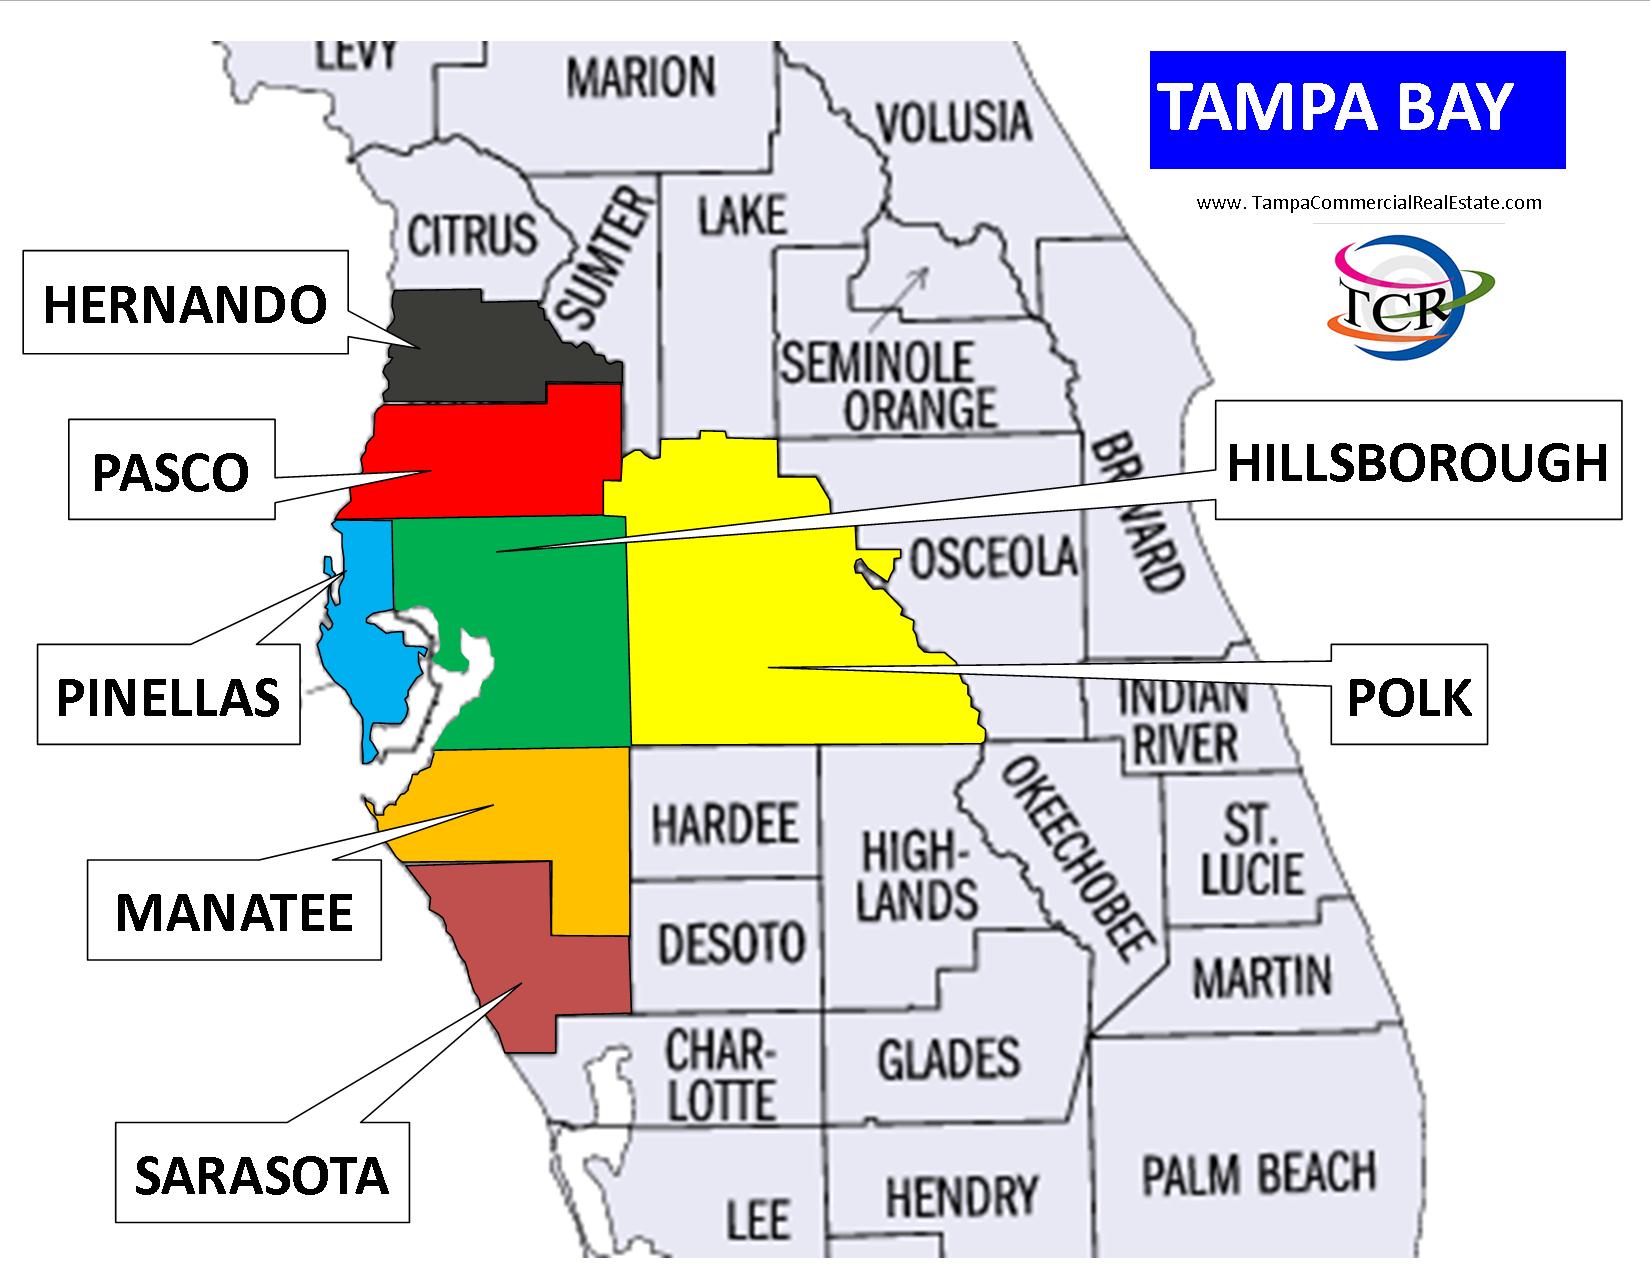 Tampa Bay Map Tampa Commercial Real Estate